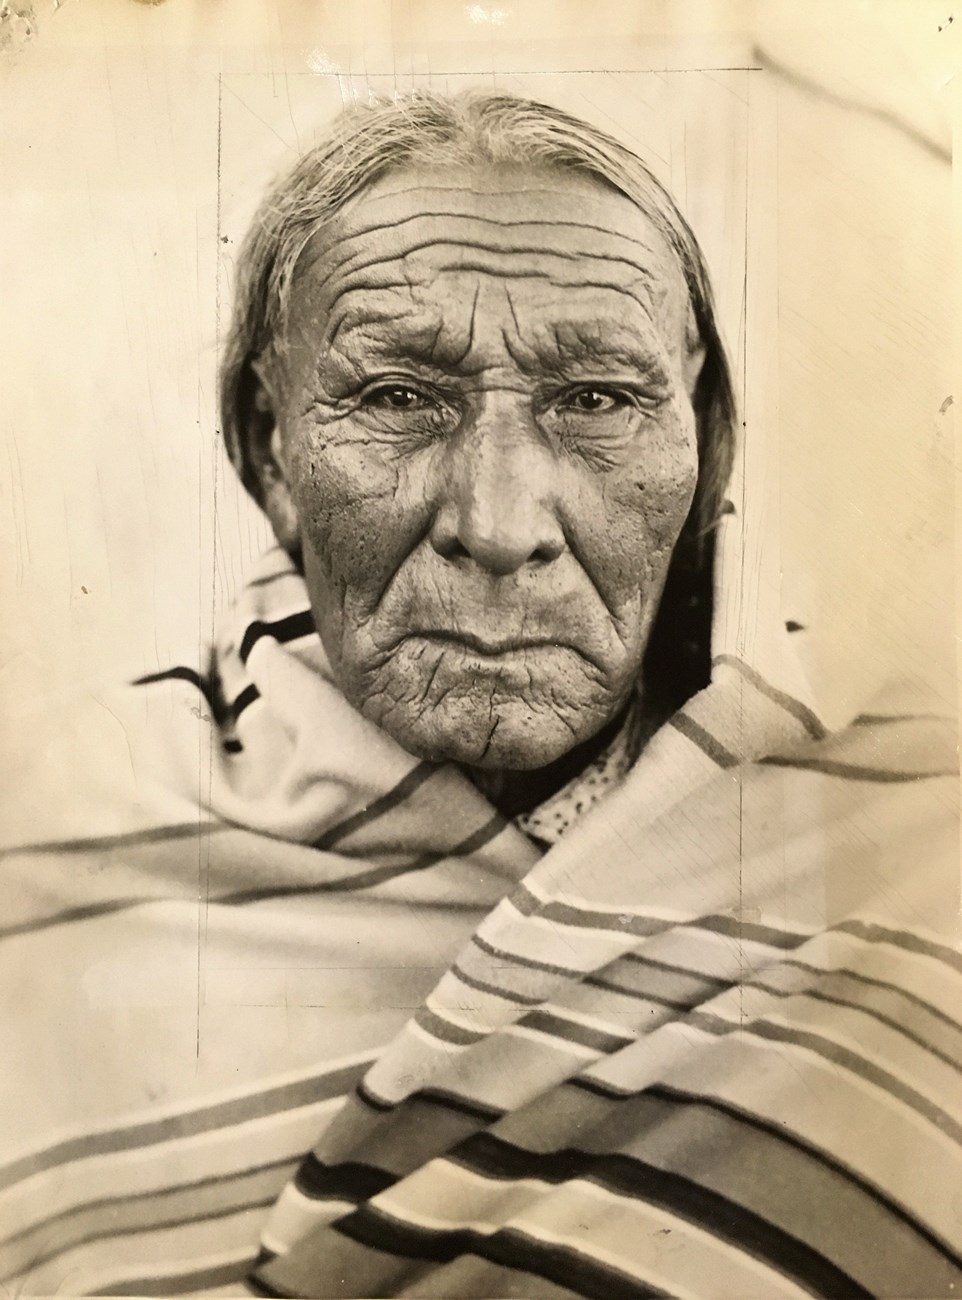 Up close photograph of Chief Magpie's face. He is around age 79. He has wrinkled, tan skin and dark silver hair. He is wrapped in a stripped wool blanket up to his neck.